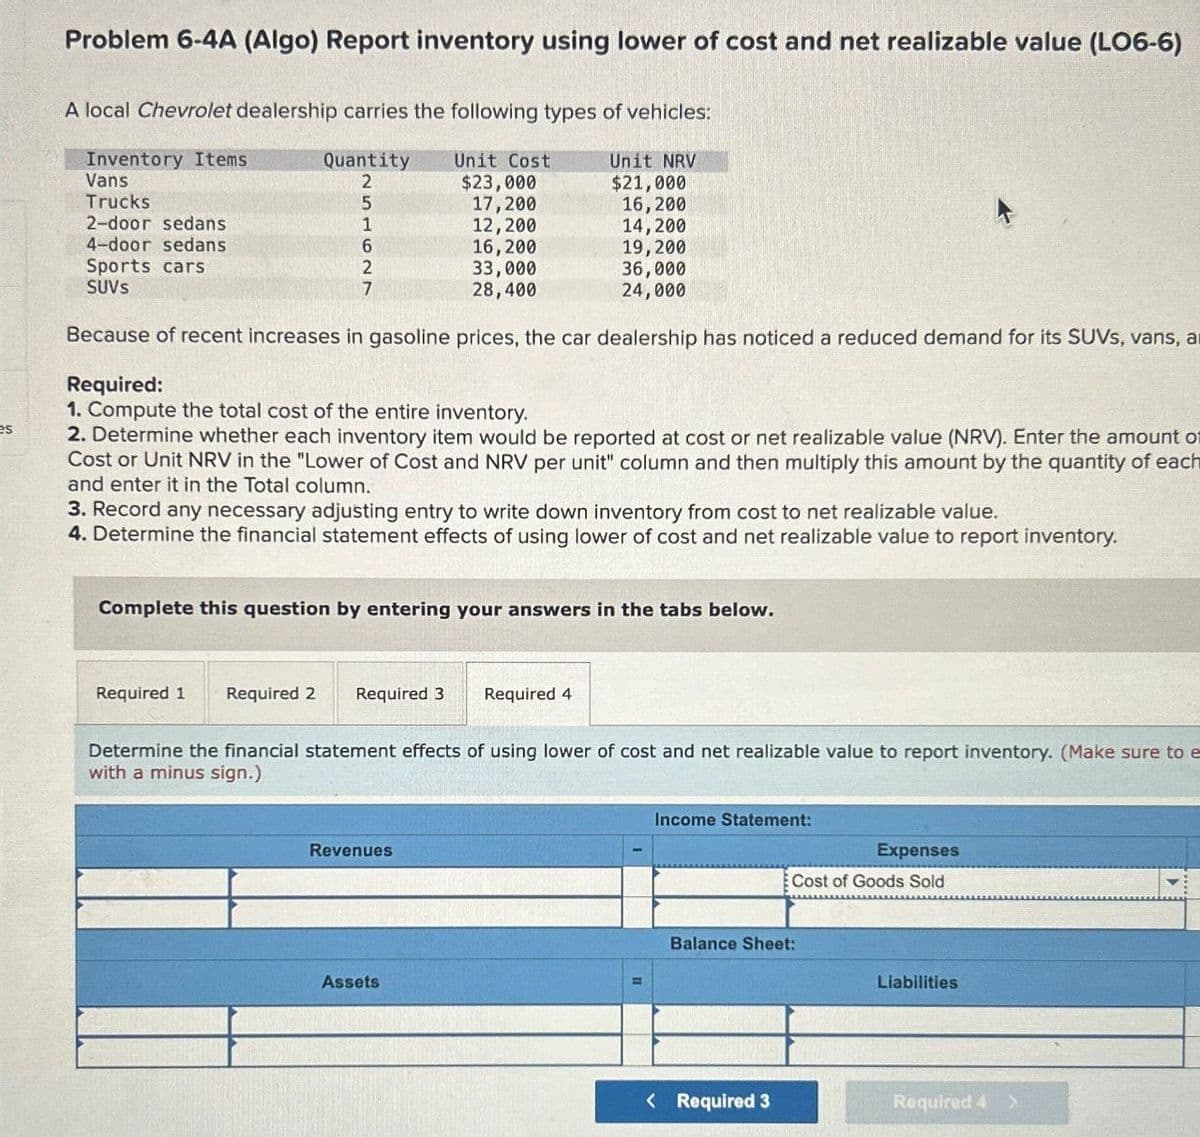 Problem 6-4A (Algo) Report inventory using lower of cost and net realizable value (LO6-6)
A local Chevrolet dealership carries the following types of vehicles:
Inventory Items
Vans
Quantity
2
Unit Cost
$23,000
Unit NRV
$21,000
Trucks
5
17,200
16,200
2-door sedans
1
12,200
14,200
4-door sedans
6
16,200
19,200
Sports cars
2
33,000
36,000
SUVS
7
28,400
24,000
Because of recent increases in gasoline prices, the car dealership has noticed a reduced demand for its SUVs, vans, a
Required:
1. Compute the total cost of the entire inventory.
es
2. Determine whether each inventory item would be reported at cost or net realizable value (NRV). Enter the amount of
Cost or Unit NRV in the "Lower of Cost and NRV per unit" column and then multiply this amount by the quantity of each
and enter it in the Total column.
3. Record any necessary adjusting entry to write down inventory from cost to net realizable value.
4. Determine the financial statement effects of using lower of cost and net realizable value to report inventory.
Complete this question by entering your answers in the tabs below.
Required 1 Required 2 Required 3
Required 4
Determine the financial statement effects of using lower of cost and net realizable value to report inventory. (Make sure to e
with a minus sign.)
Revenues
Income Statement:
Expenses
Cost of Goods Sold
Balance Sheet:
Assets
Liabilities
< Required 3
Required 4 >